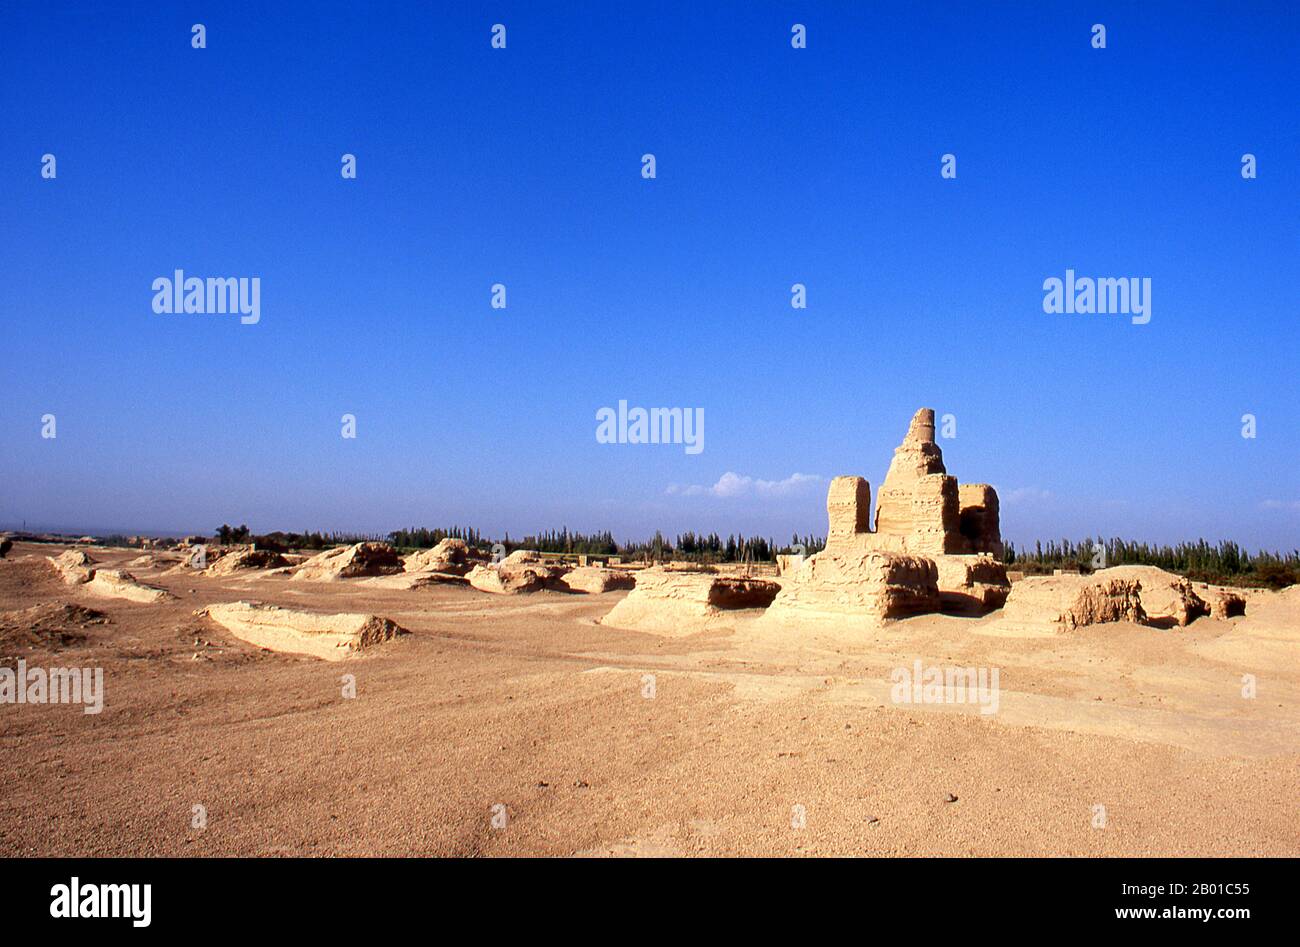 China: Ancient pagoda, Yarkhoto or Jiaohe Gucheng (Jiaohe Ancient City), near Turpan, Xinjiang.  Yarkhoto (Jiaohe Ruins) is found in the Yarnaz Valley, 10 km west of the city of Turpan. Yarkhoto was developed as an administrative centre and garrison town by the Chinese following the Han conquest of the area in the 2nd century BC. The city flourished under the Tang Dynasty (618-907), but subsequently went into decline, and was finally abandoned early in the 14th century. Stock Photo